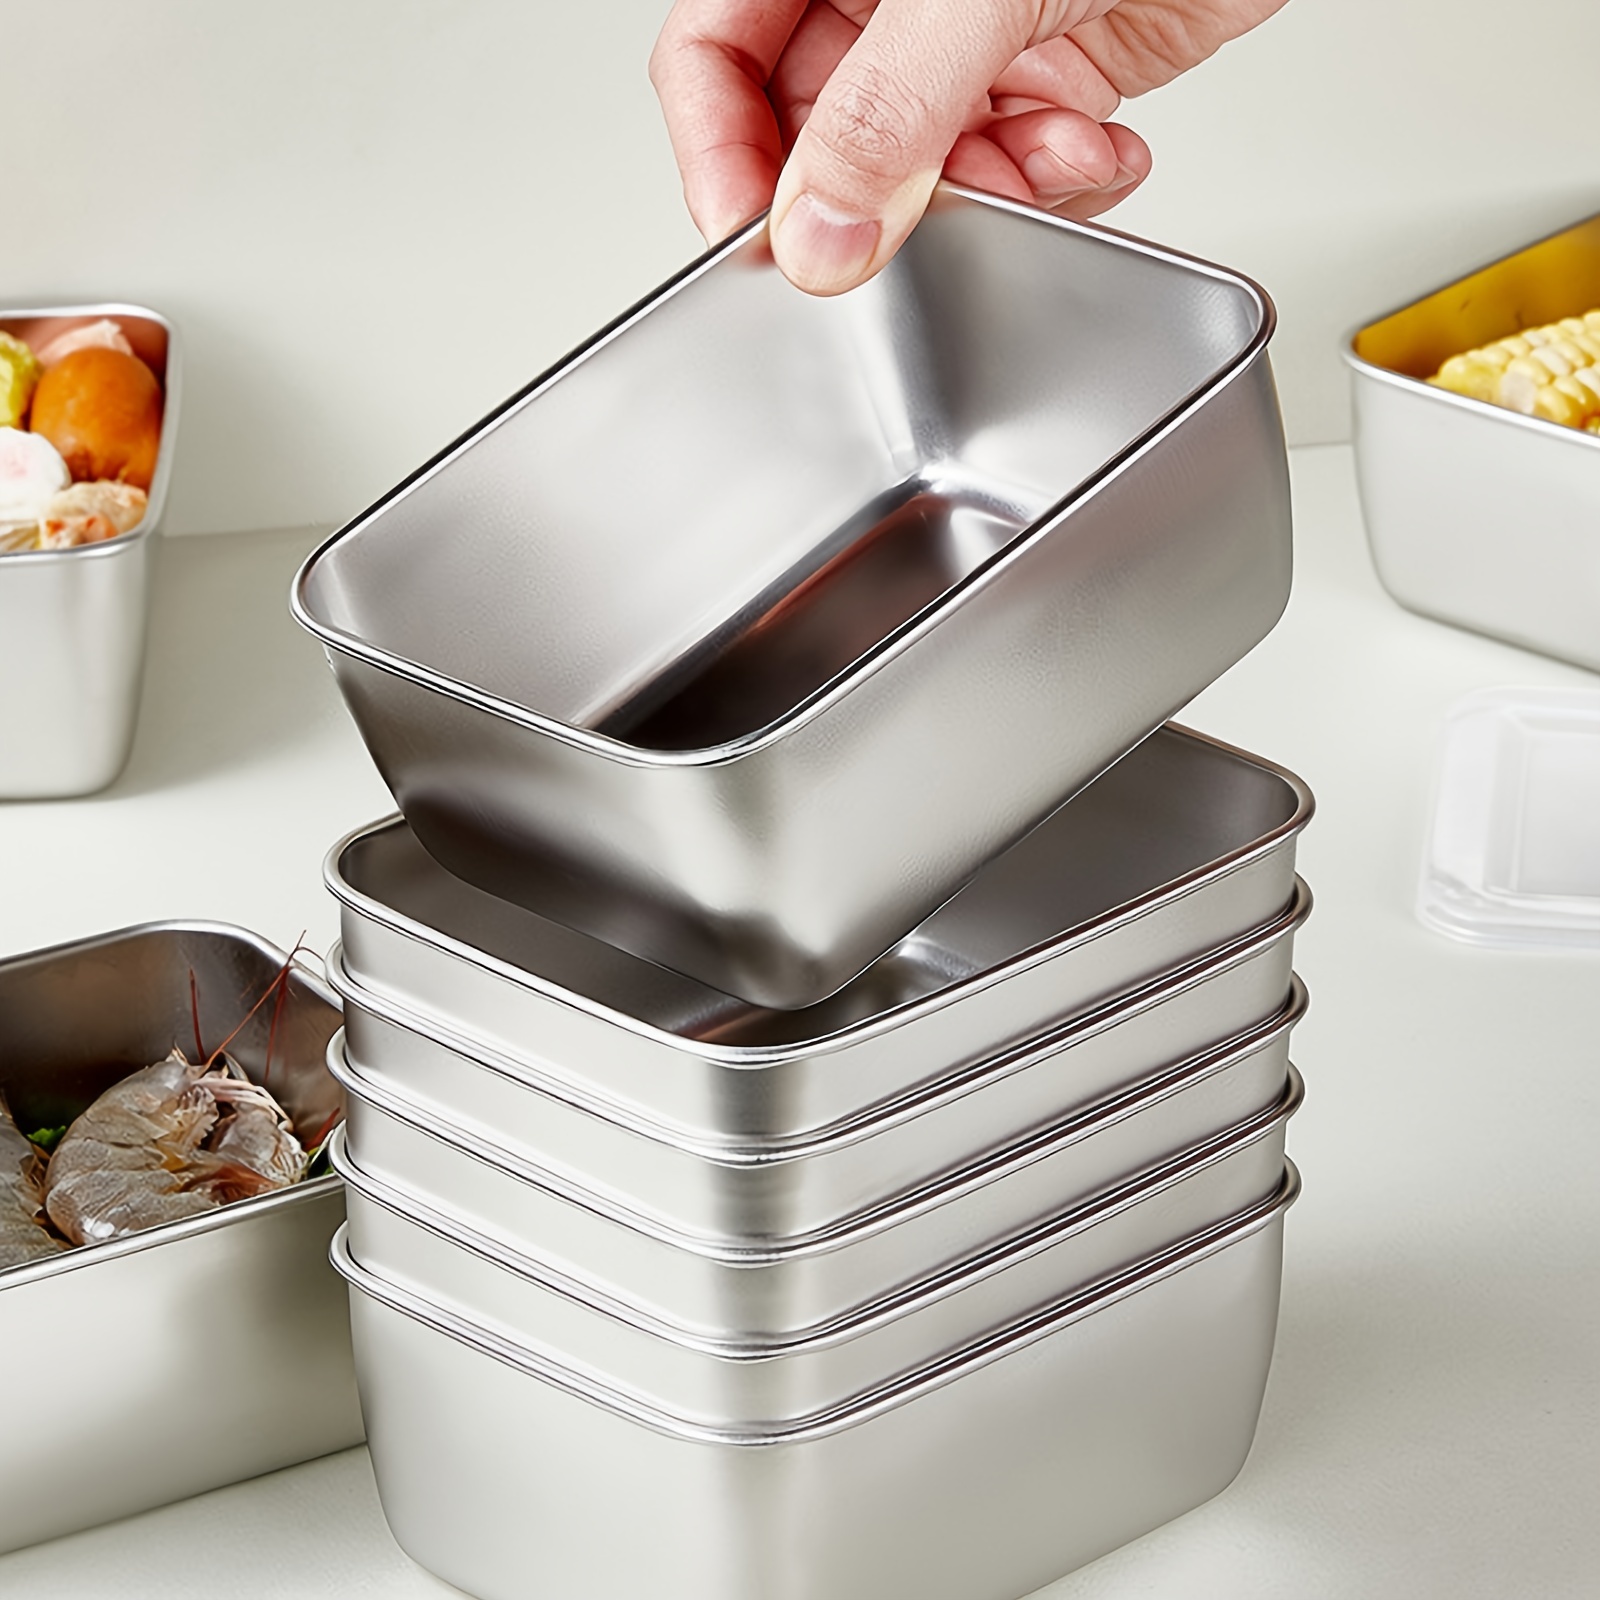 Stainless Steel Meat Containers